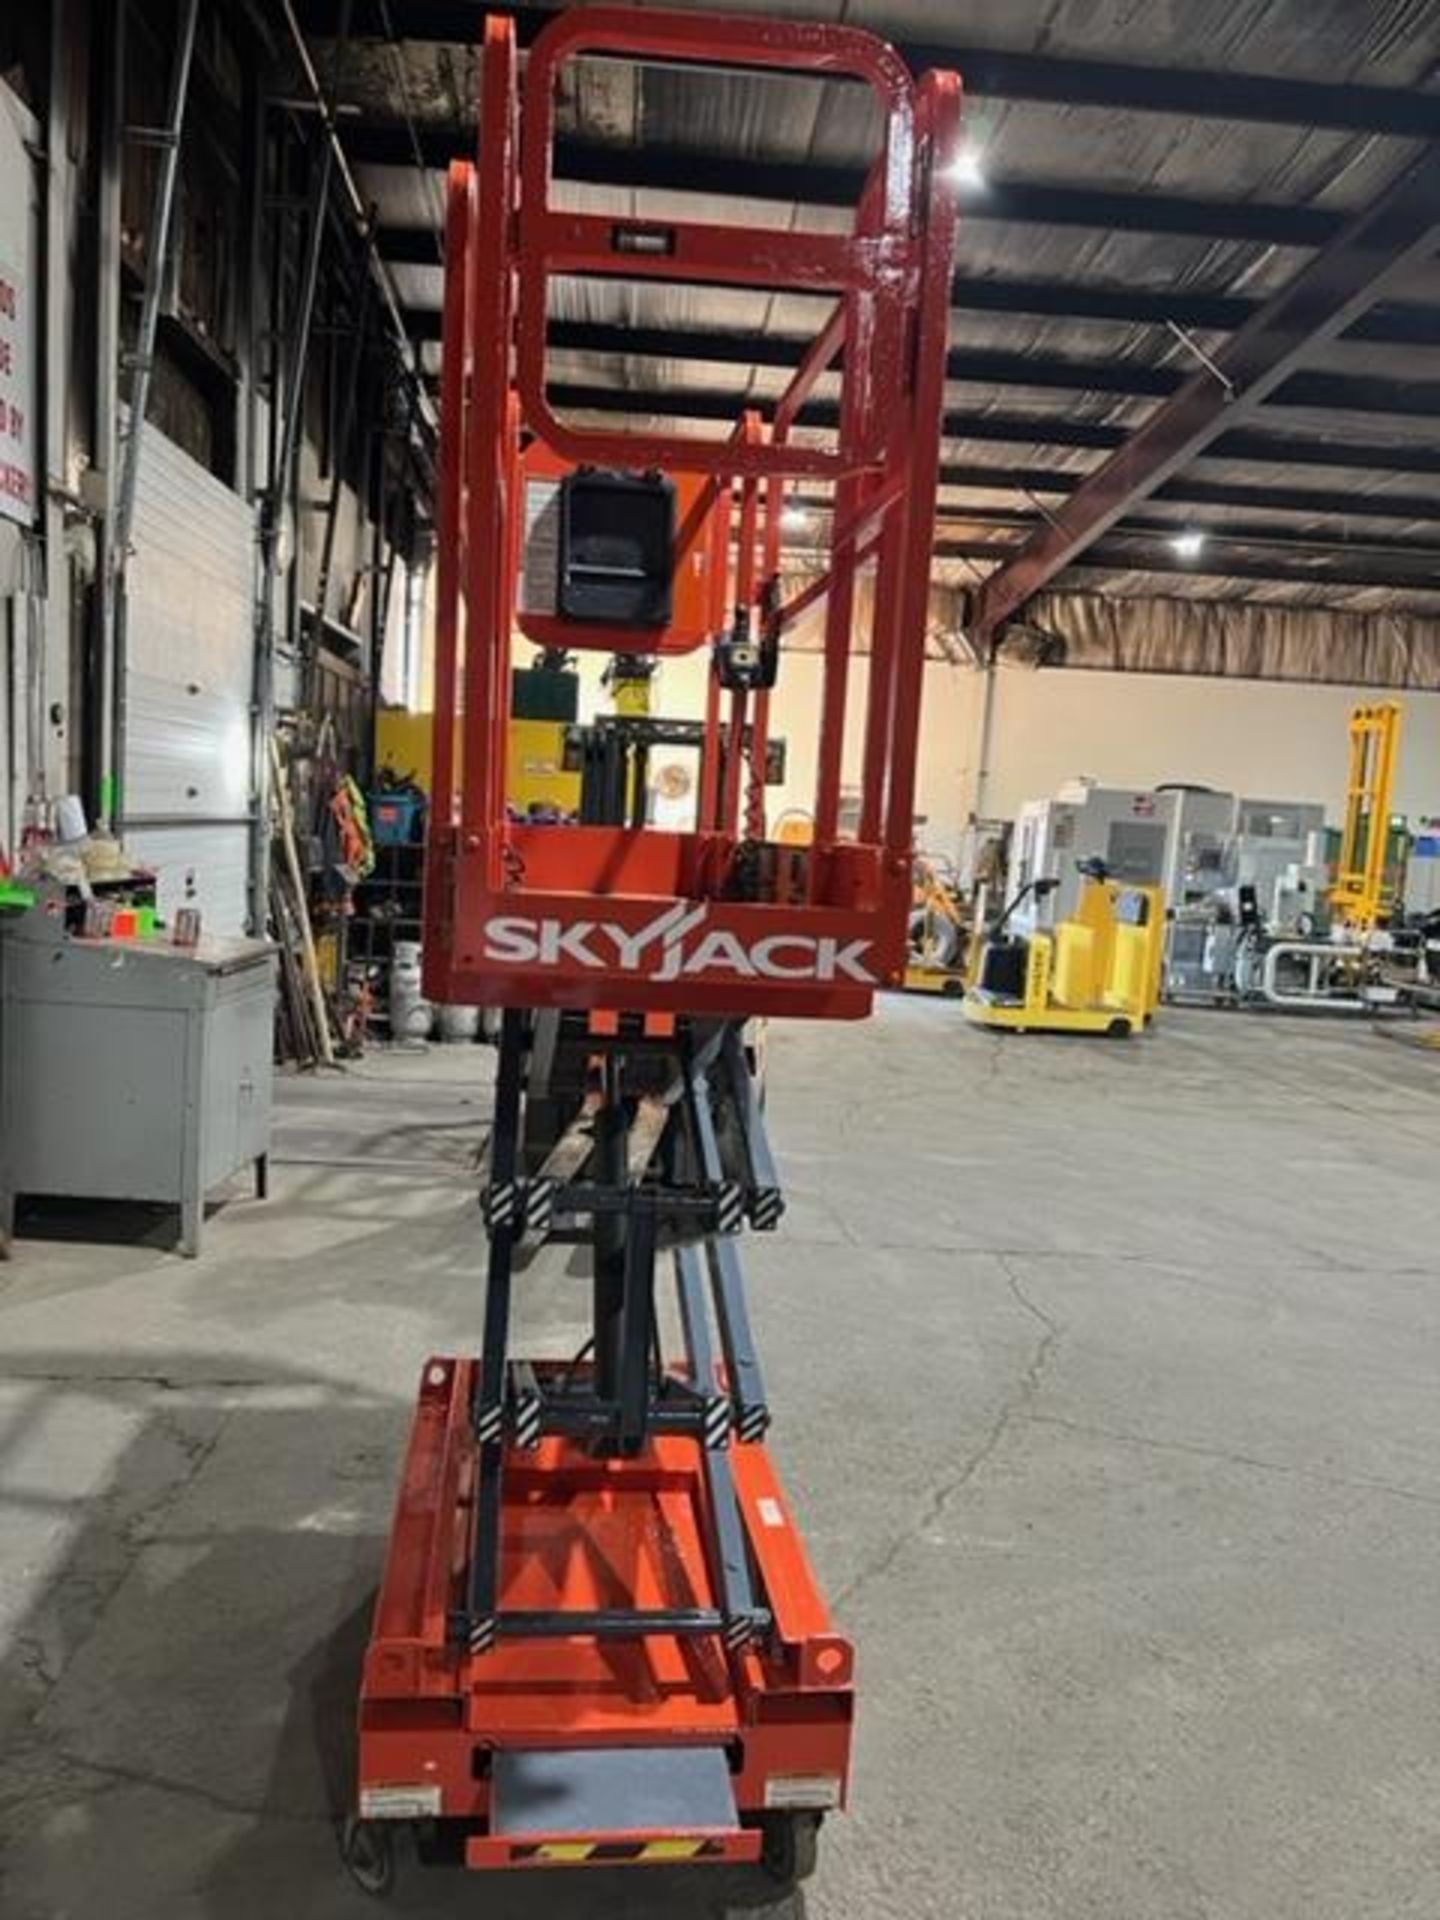 Skyjack Approximately 12' Lift Motorized Scissor Lift - As Is machine with electrical issues - Image 4 of 4